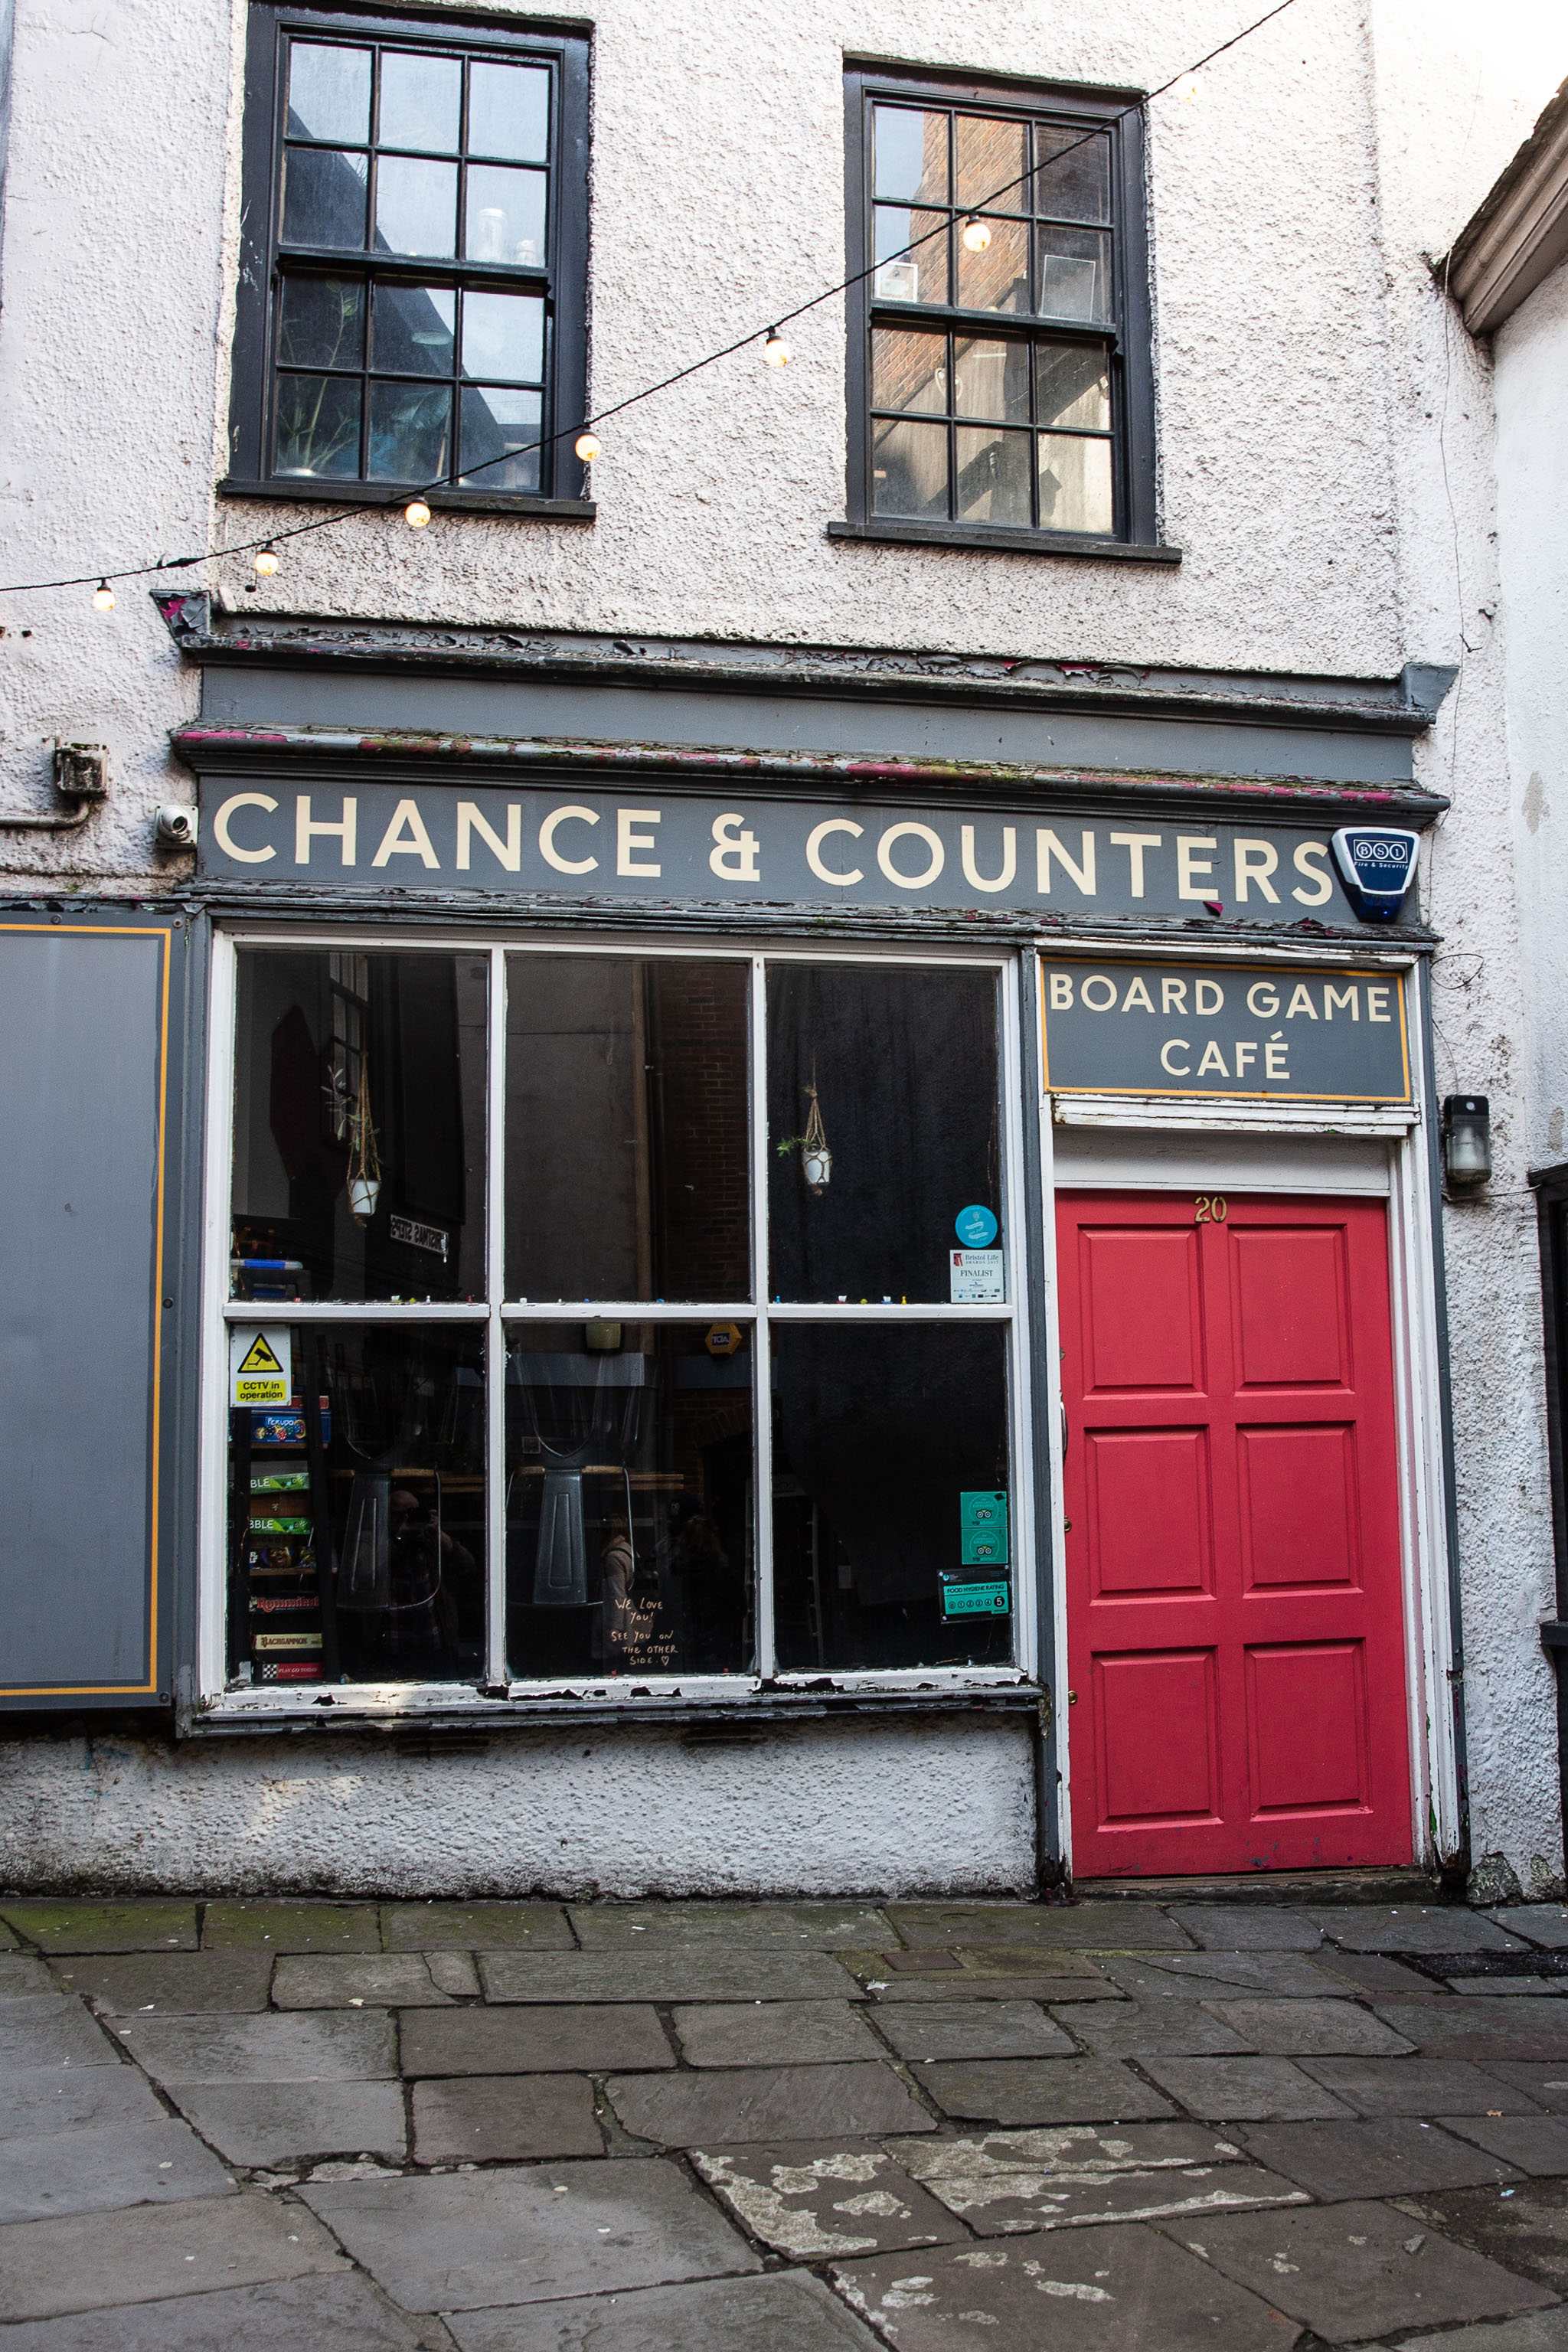 Chance & Counters
Which is a bloody great name for a board game cafe.
